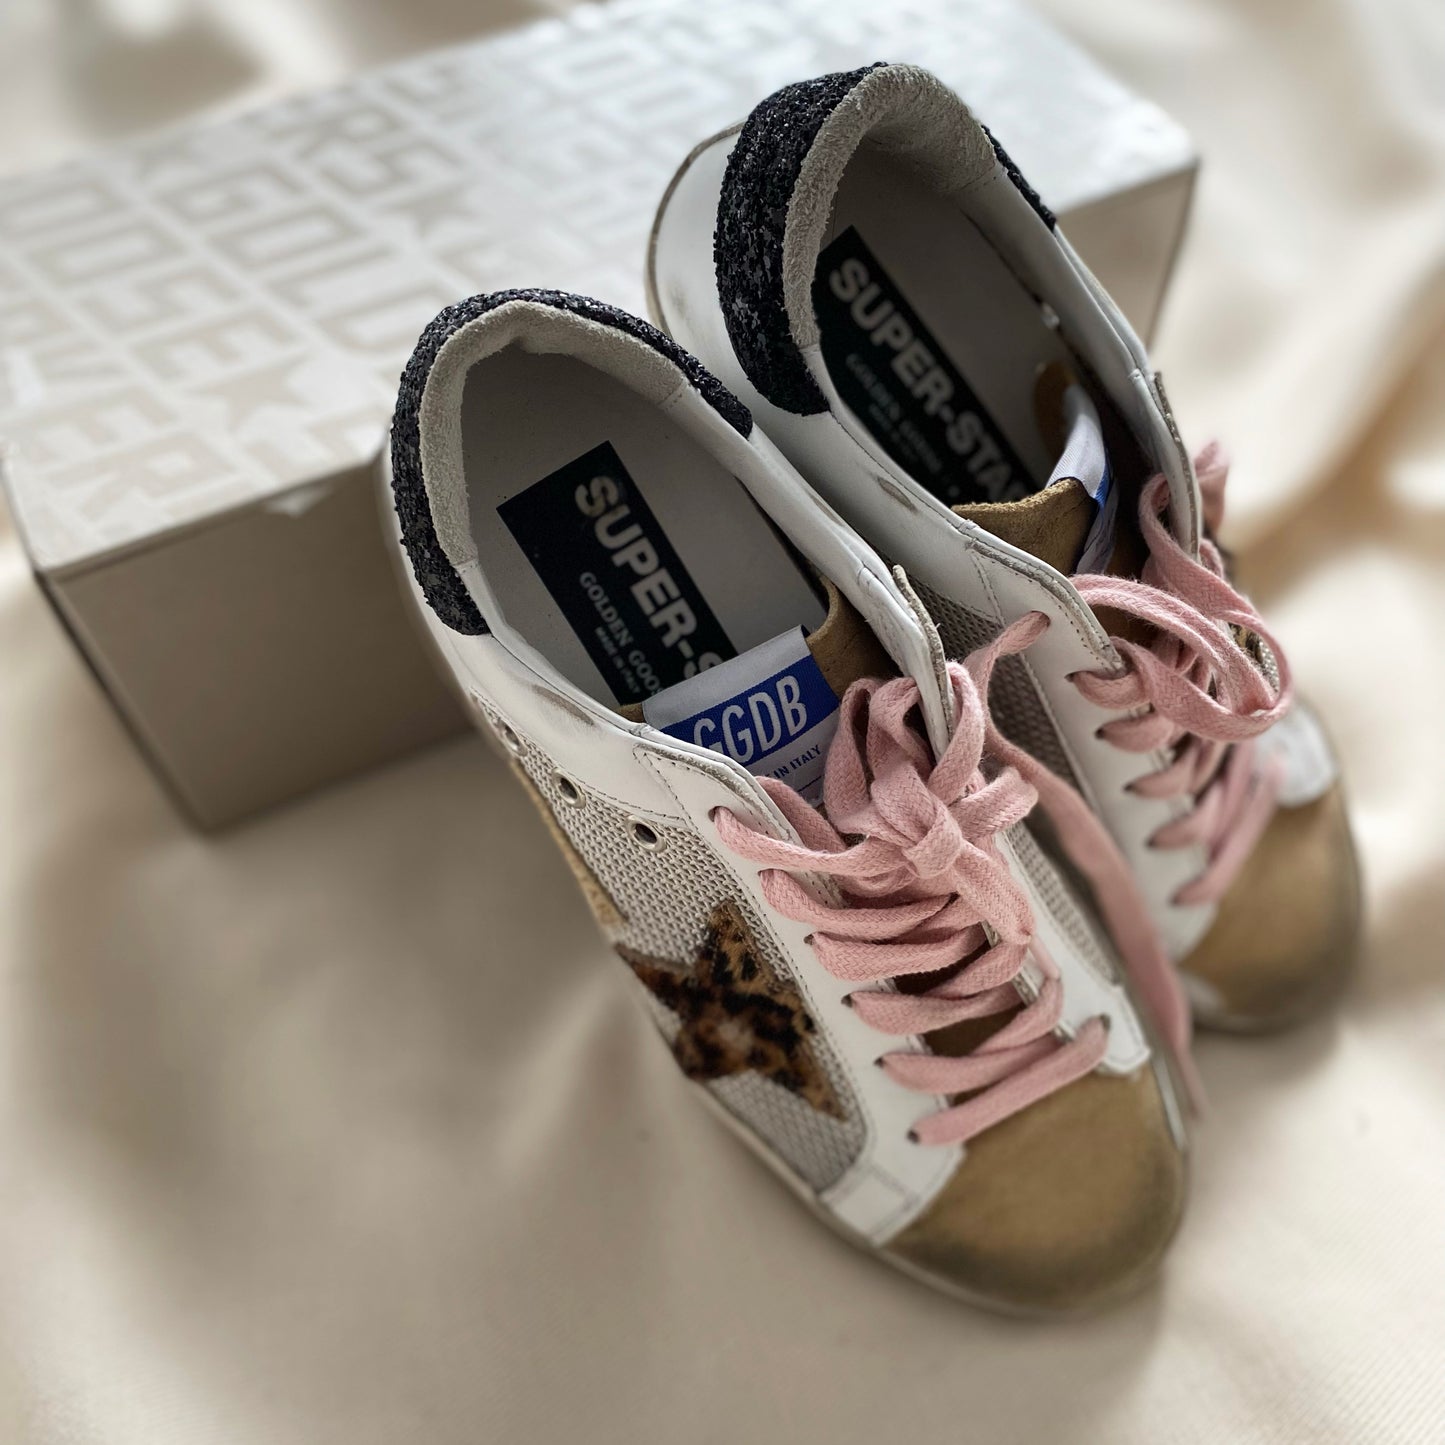 Golden Goose Superstar Sneakers Mesh with Leopard Star, size 36